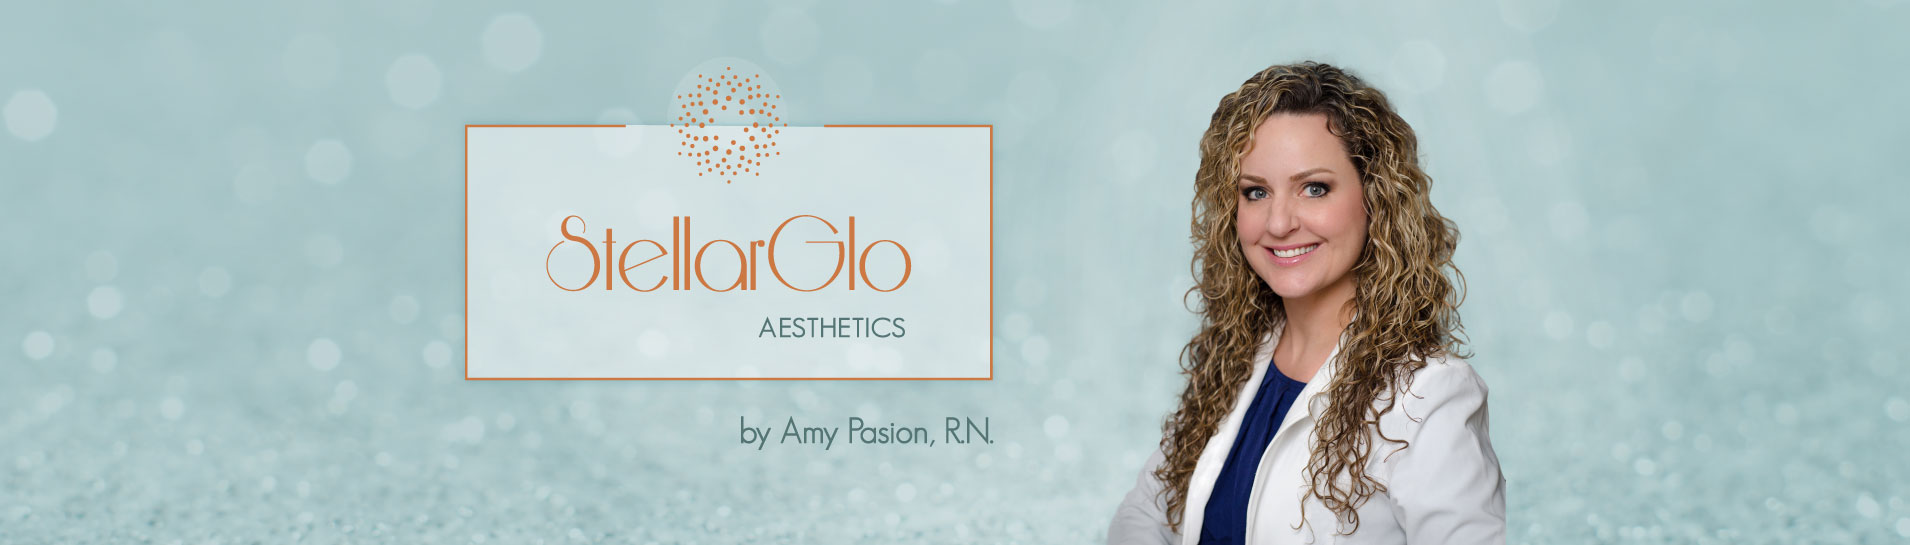 StellarGlo Aesthetics by Amy Pasion, R.N.